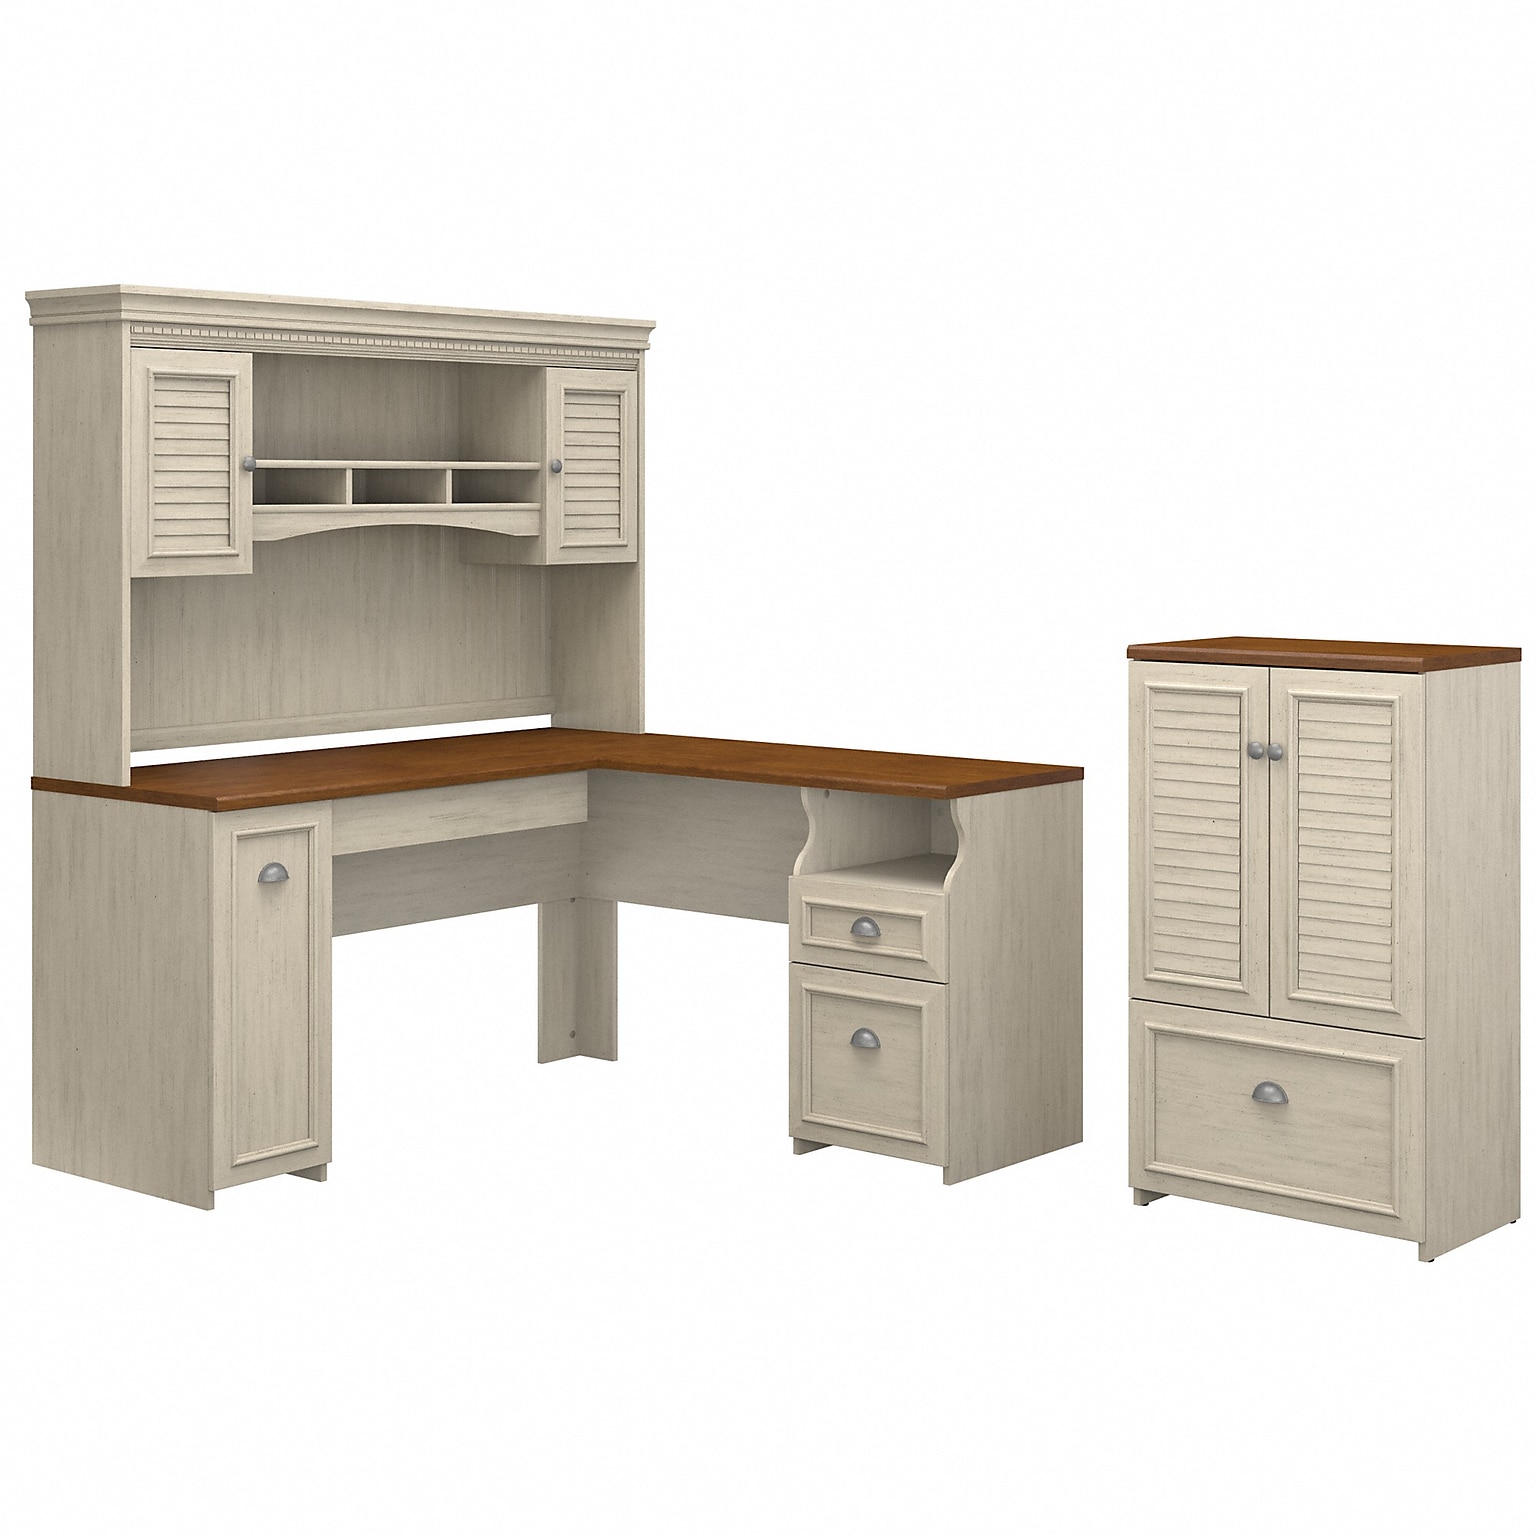 Bush Furniture Fairview 60W L Shaped Desk with Hutch and Storage Cabinet with File Drawer, Antique White/Tea Maple (FV010AW)